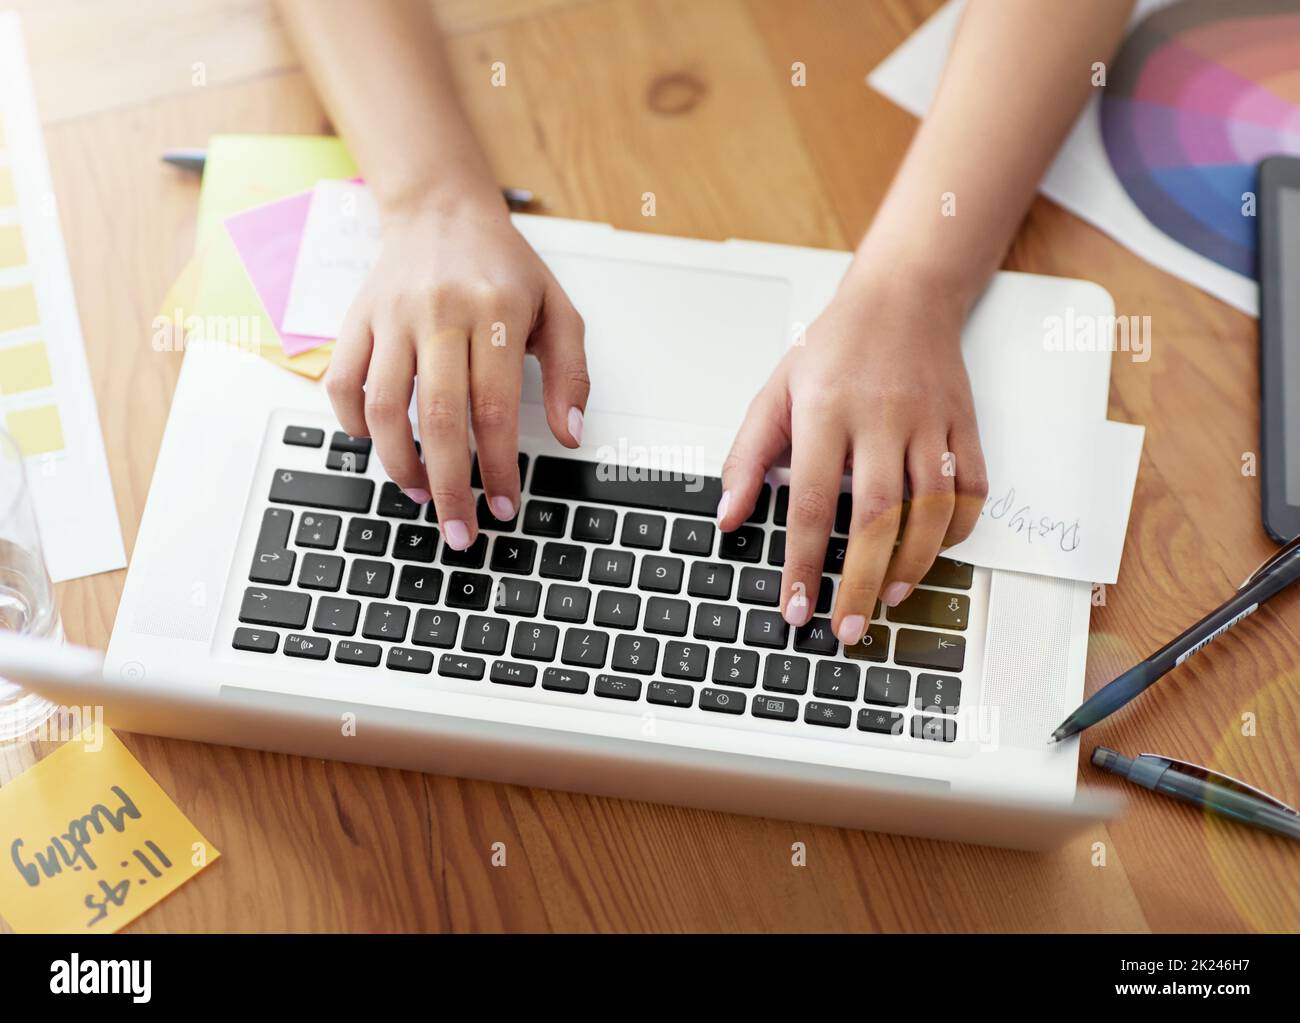 Design pro at work. a creative professional working on a laptop. Stock Photo